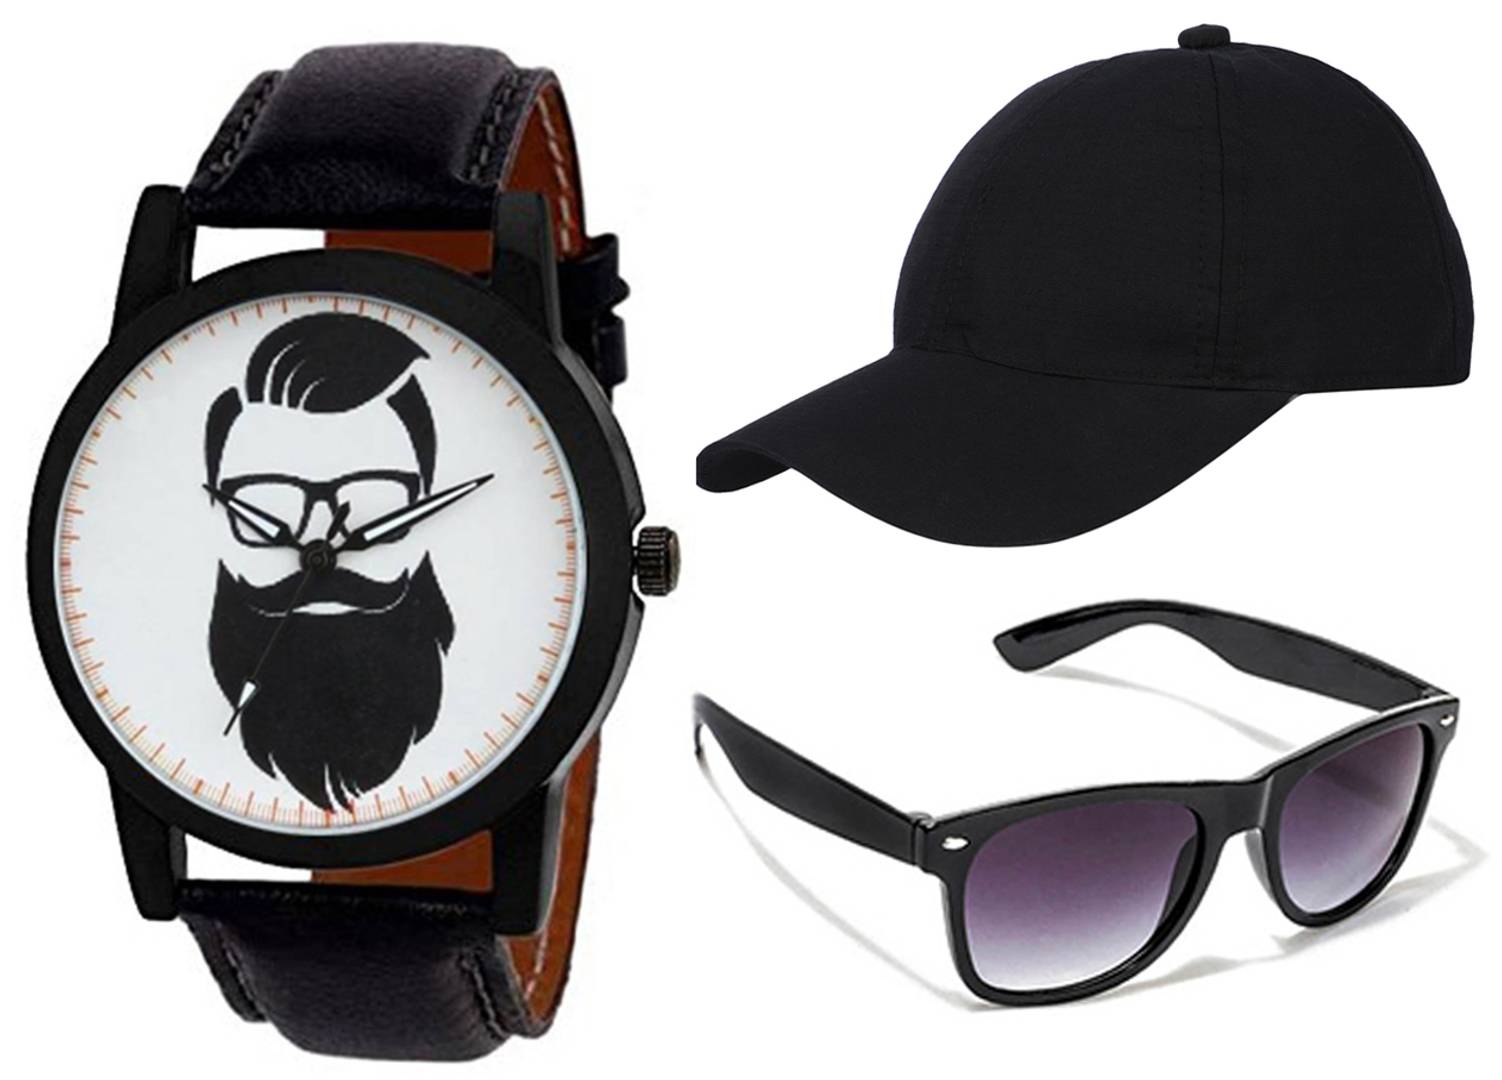 Black Dial Strap Boy's Analog Watch With Black Cap And Foldable Sunglass